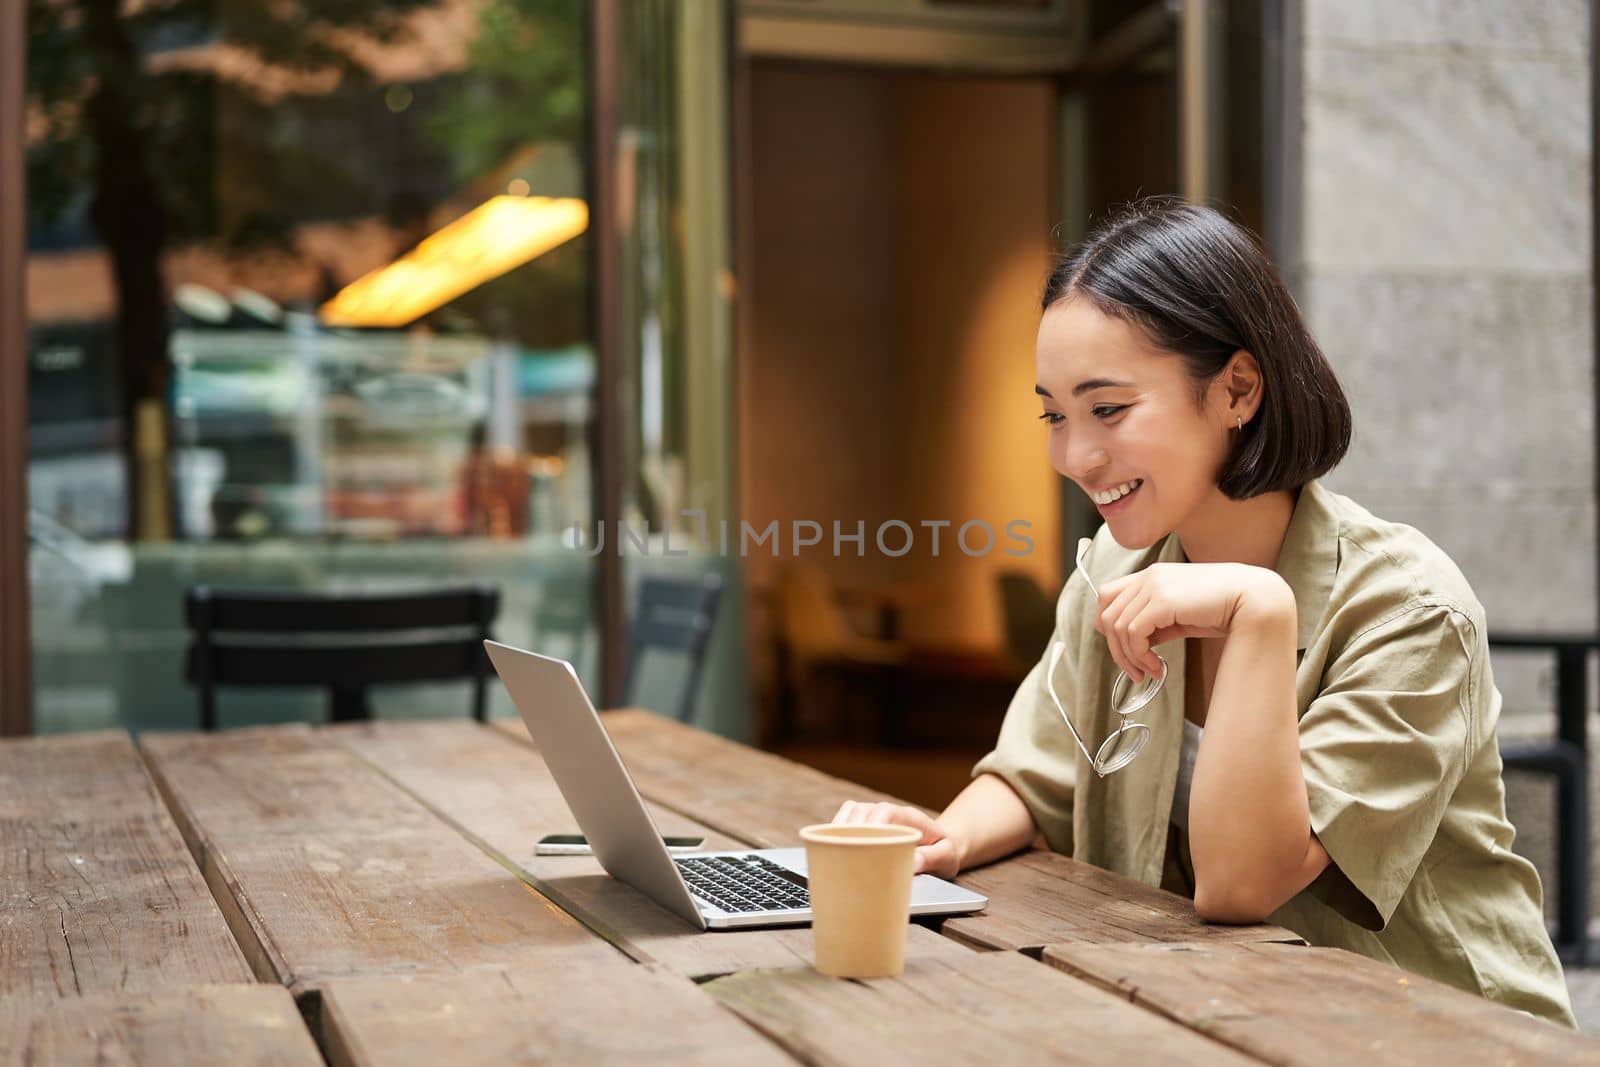 Portrait of asian woman looking at laptop, video chat, talking with someone via computer camera, sitting in cafe and drinking coffee, online meeting.